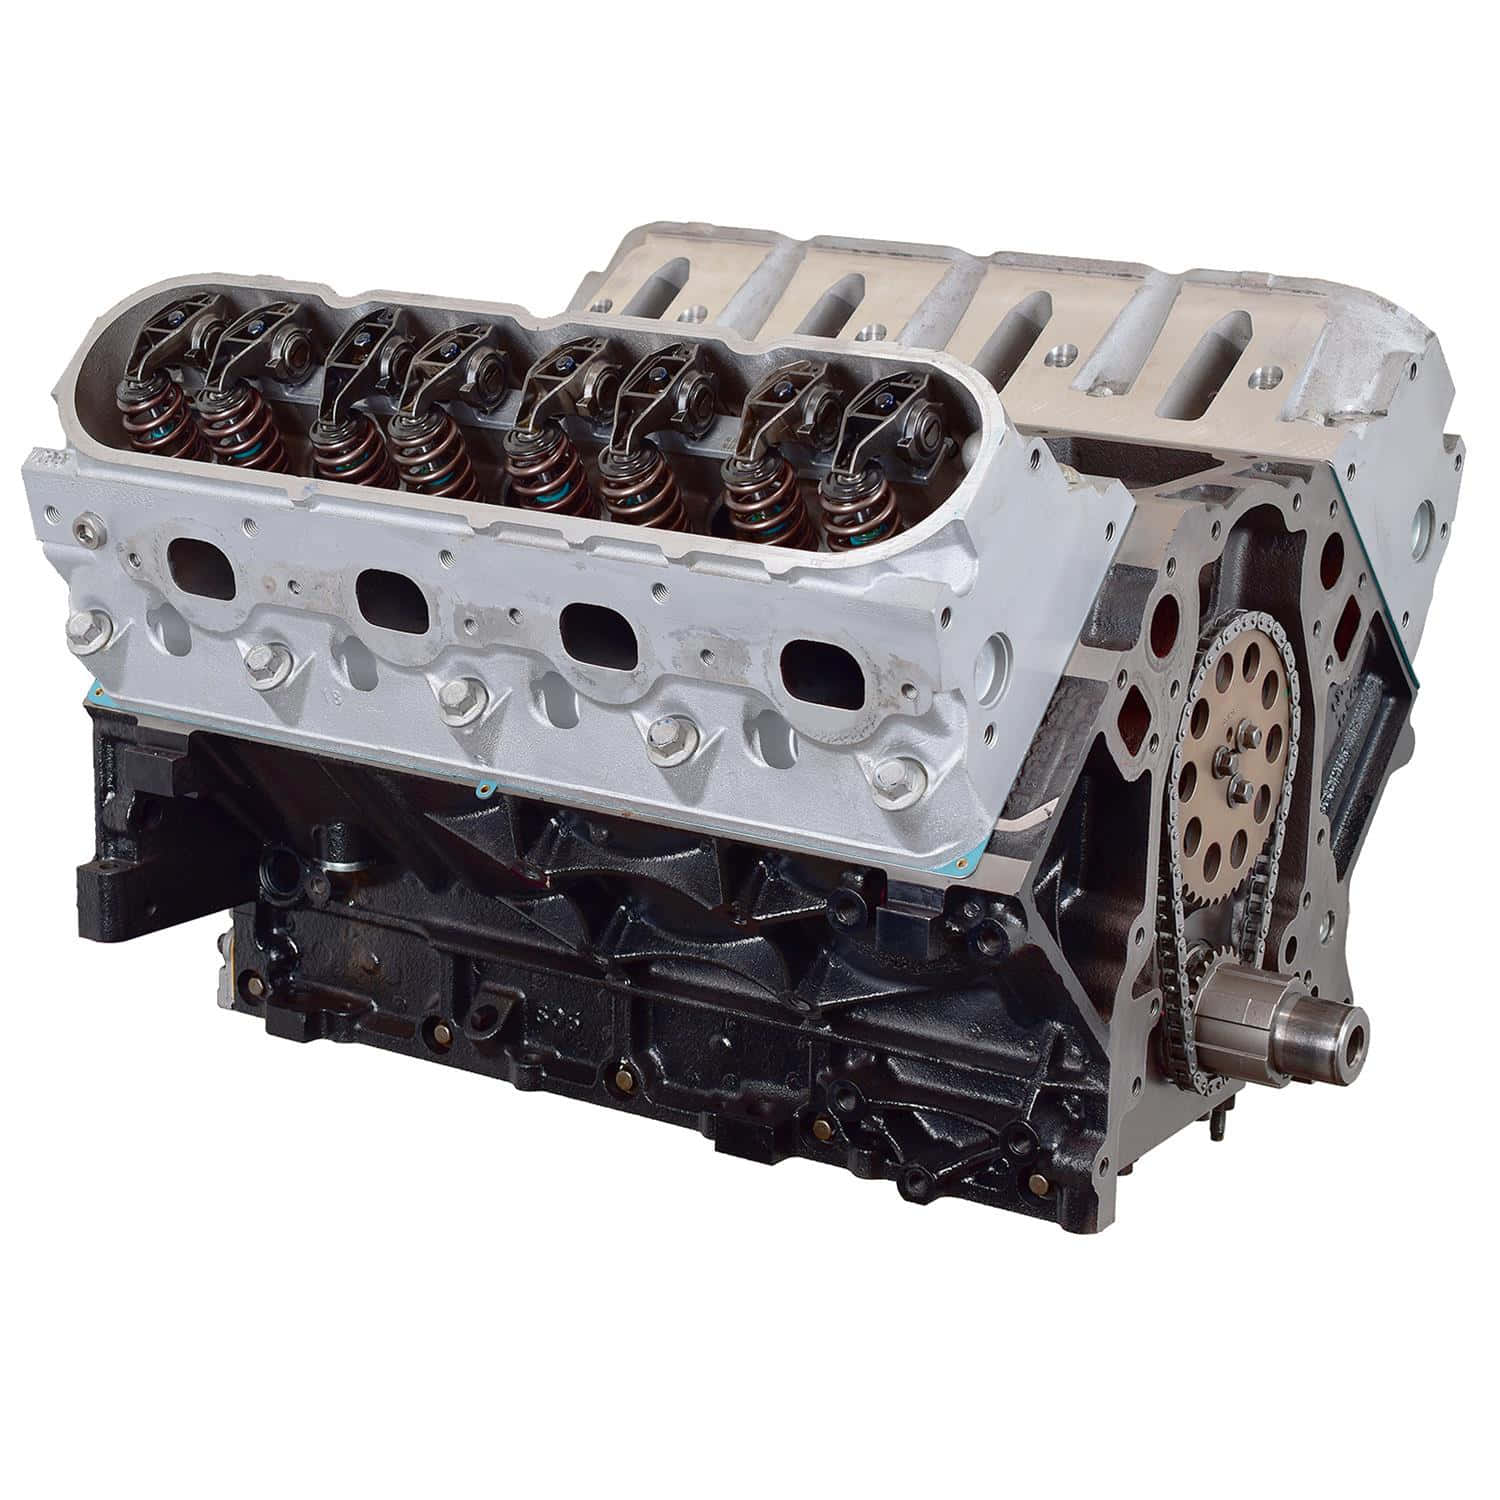 A Chevrolet C6 Engine On A White Background